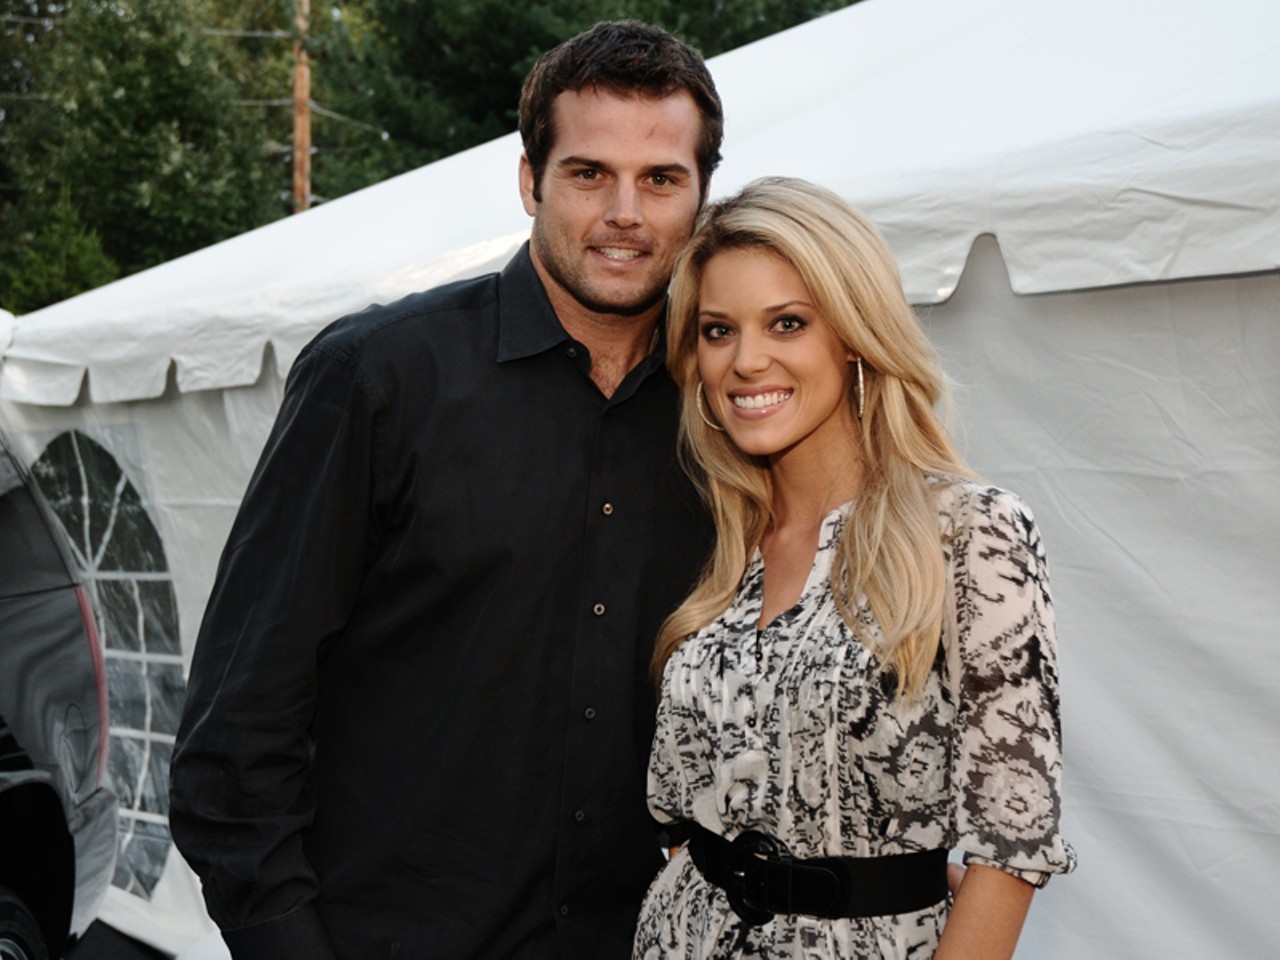 Hey, there's new Rams quarterback Kyle Boller with former Miss California USA 2009, Carrie Prejean.